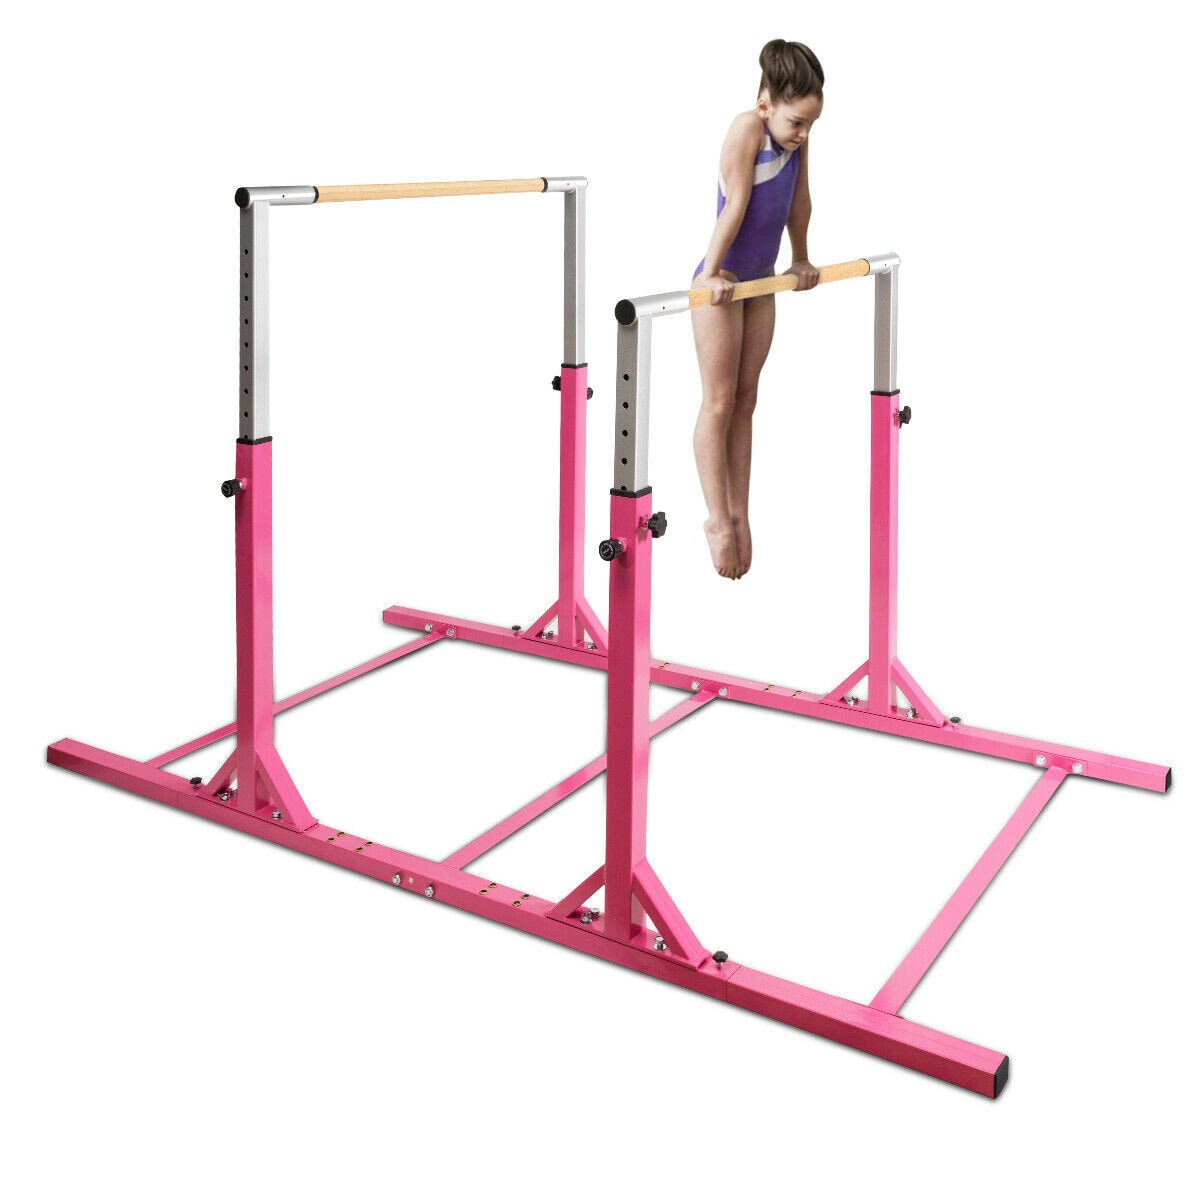 We R Sports Parallel Gymnastics Bars Dip Stands Cross fit Gymnastic Core Workout 